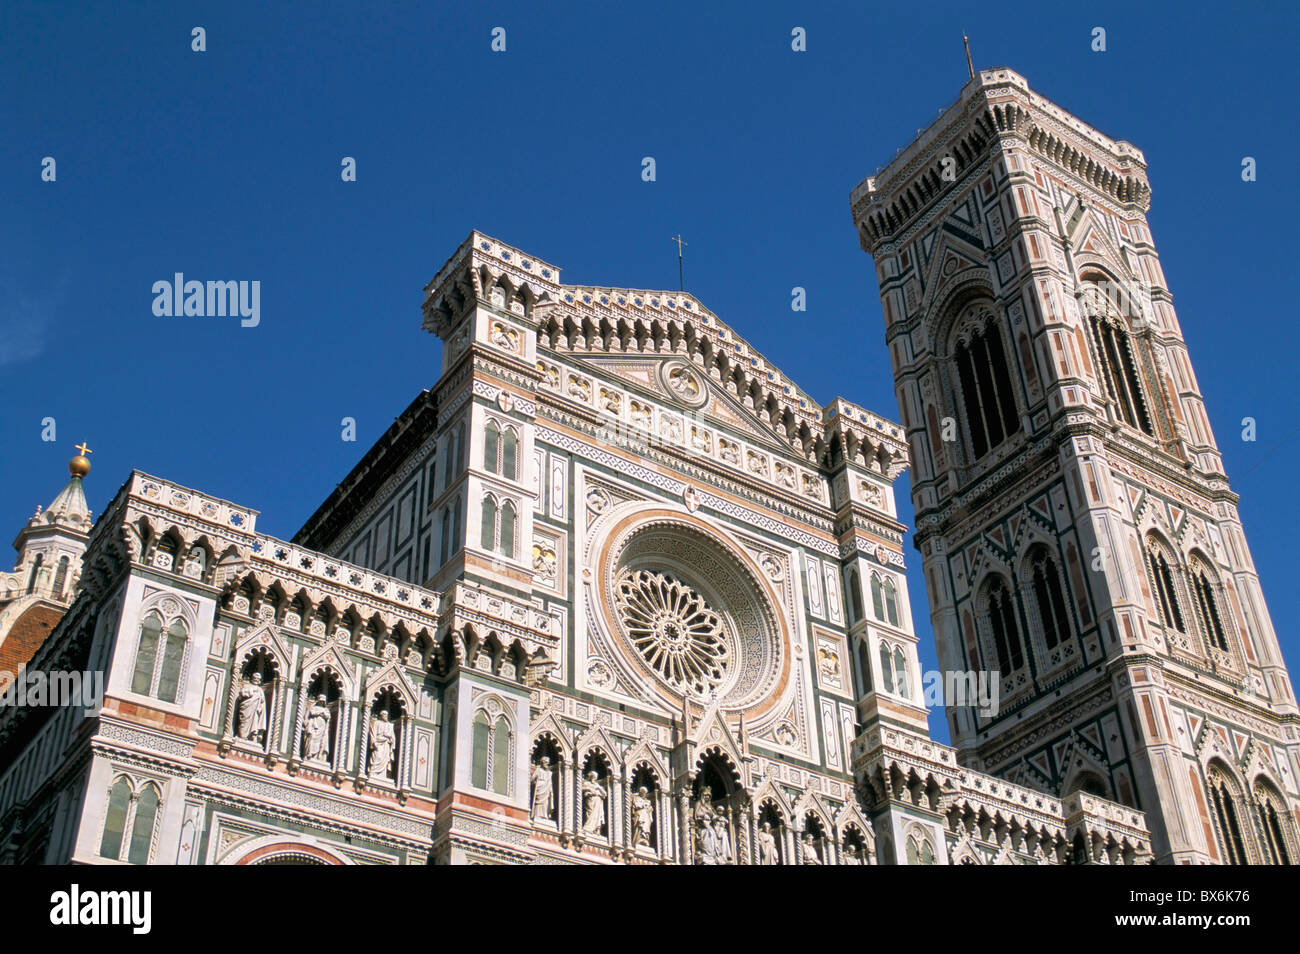 Duomo and campanile (cathedral and bell tower), Florence, UNESCO World Heritage Site, Tuscany, Italy, Europe Stock Photo